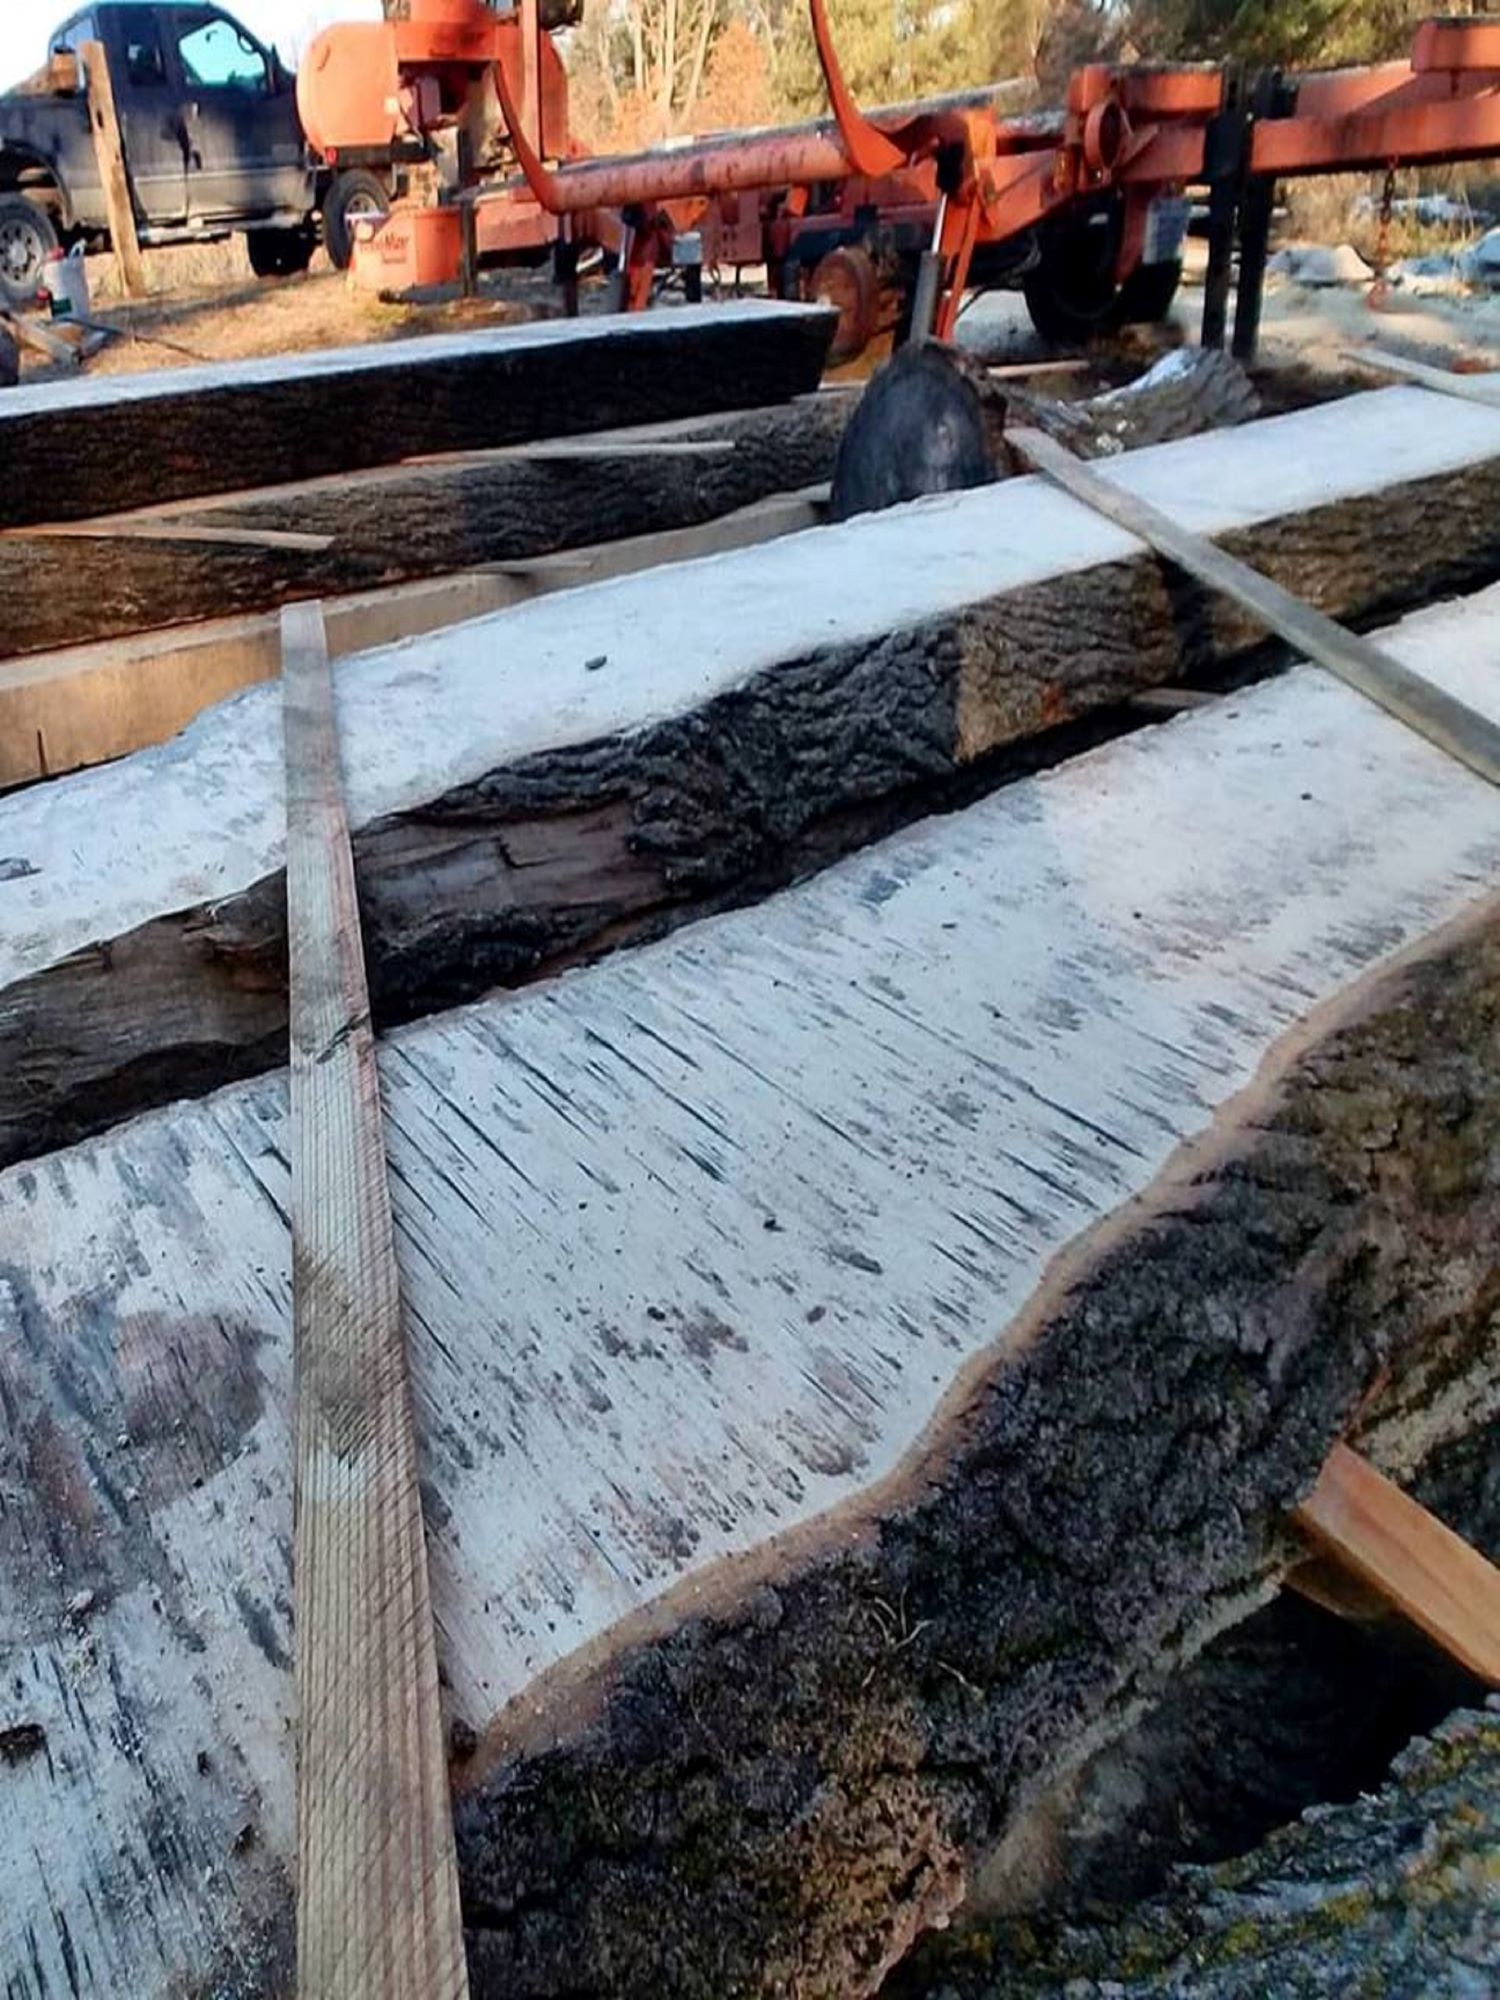 Maple live edge slabs with visible saw marks